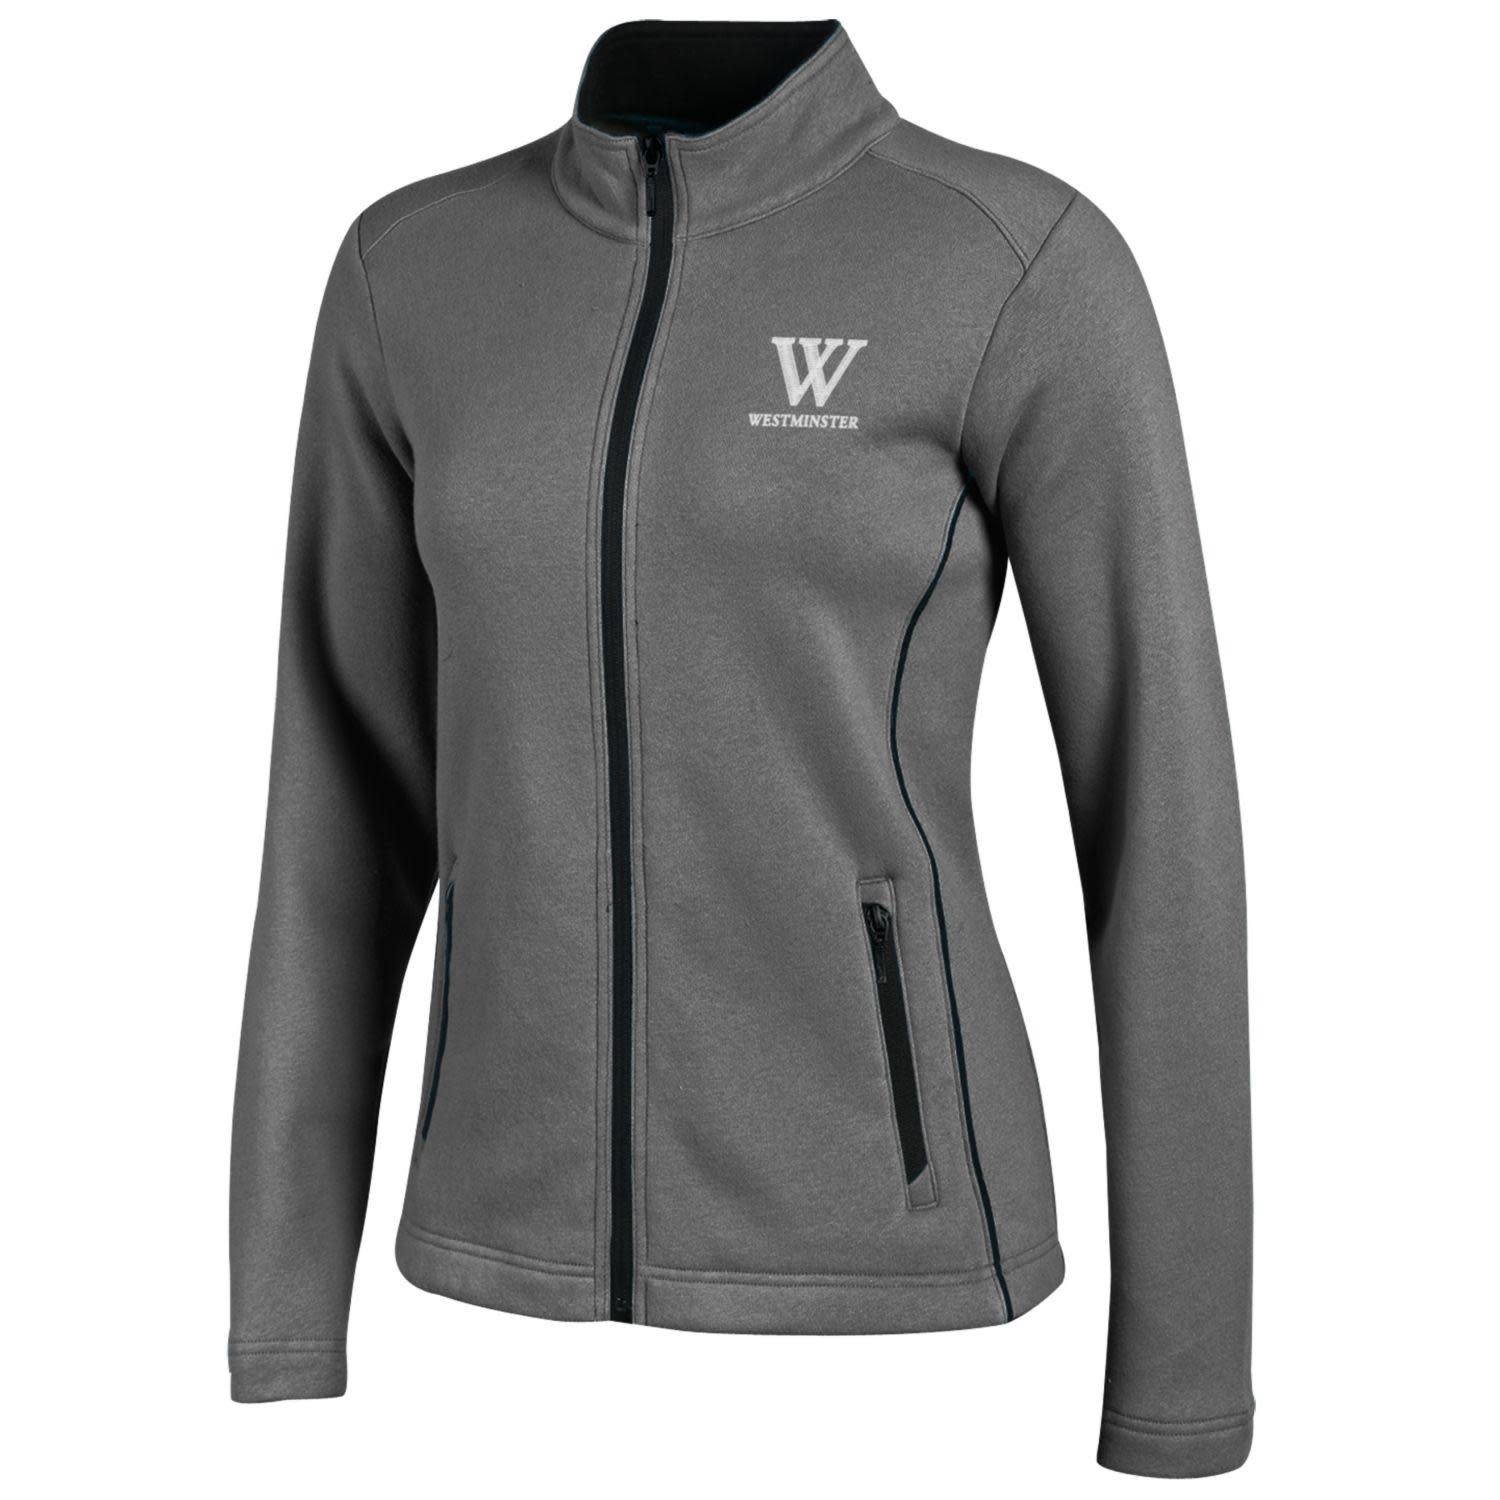 Under Armour Jacket: Gear for Sports Women's Deluxe Touch Full Zip